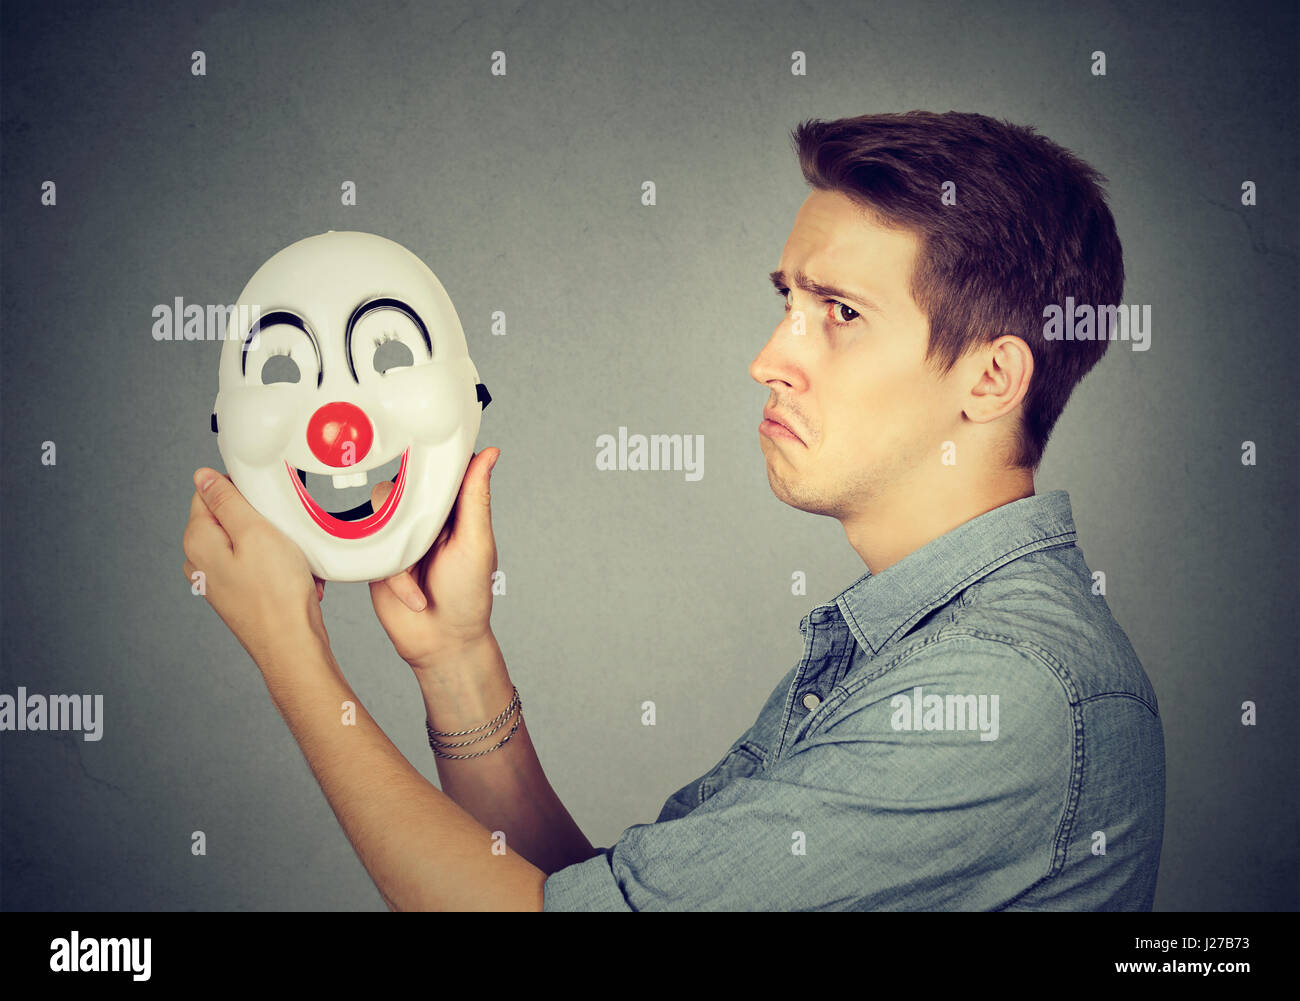 Young sad man with happy clown mask isolated on gray wall background. Human emotions. Split personality concept Stock Photo